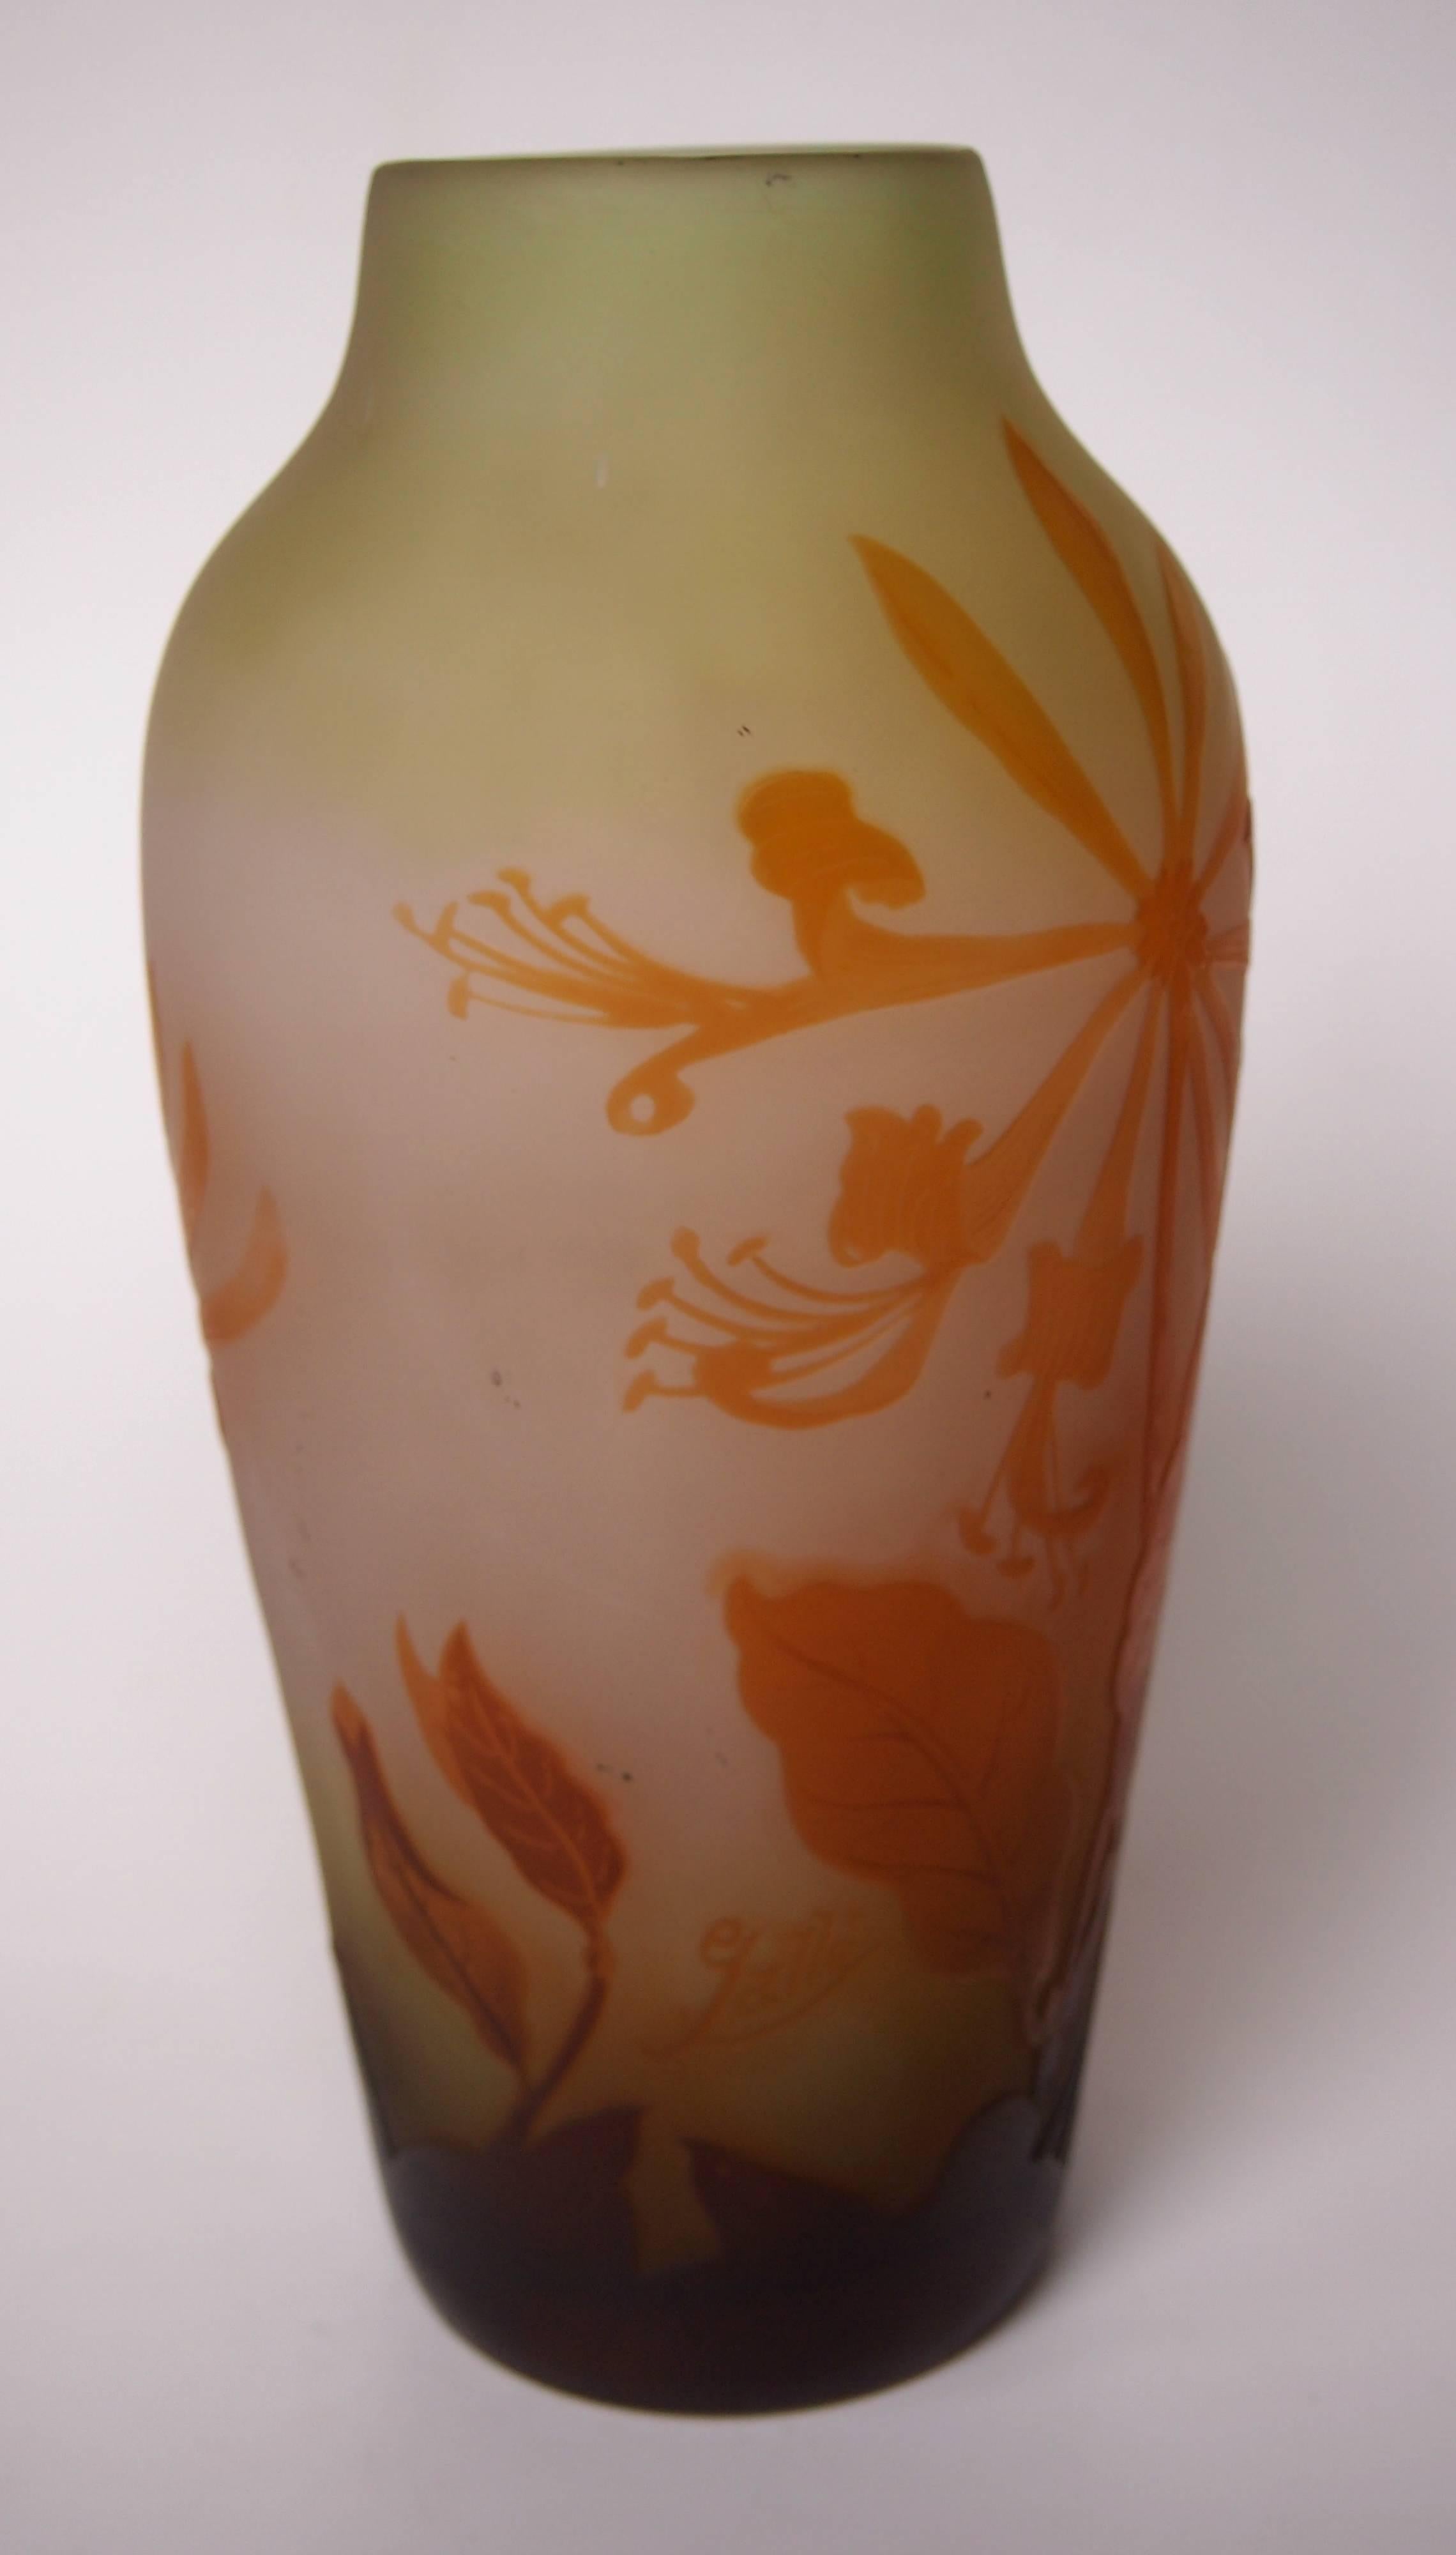 French Art Nouveau Emile Galle Cameo Vase with Honeysuckle Signed, circa 1900